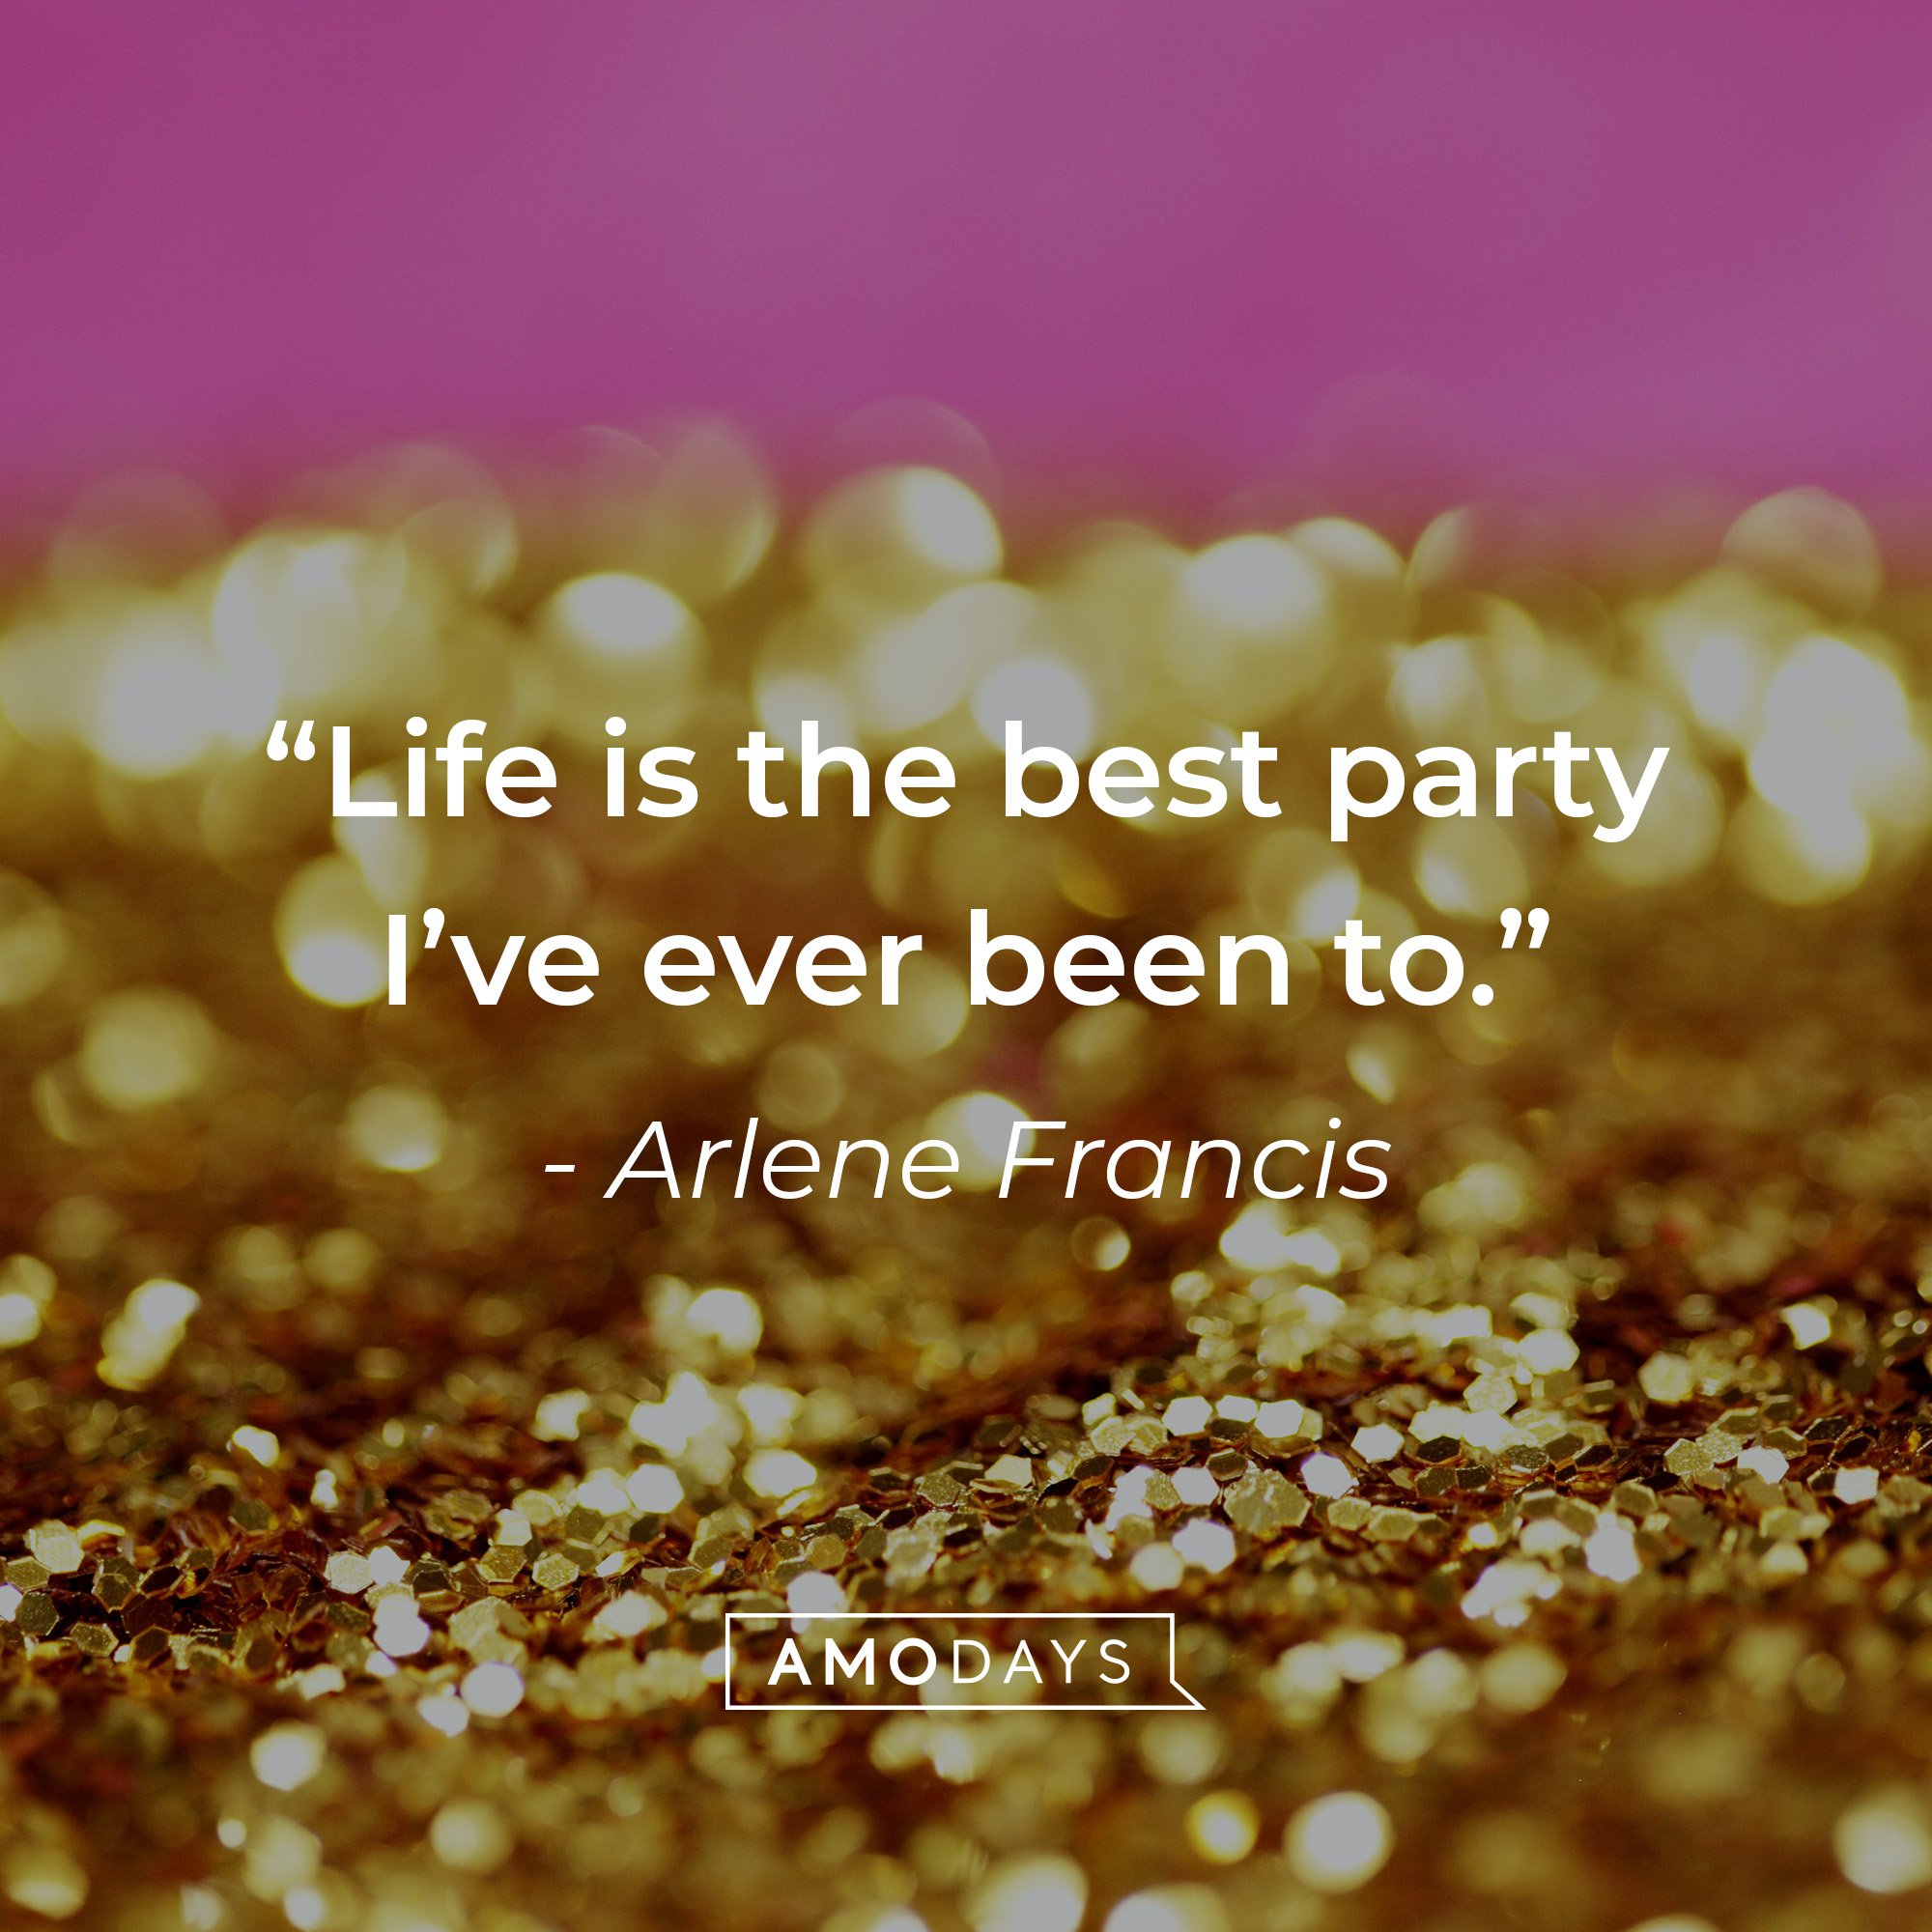 Arlene Francis' quote: "Life is the best party I've ever been to." | Image: AmoDays 